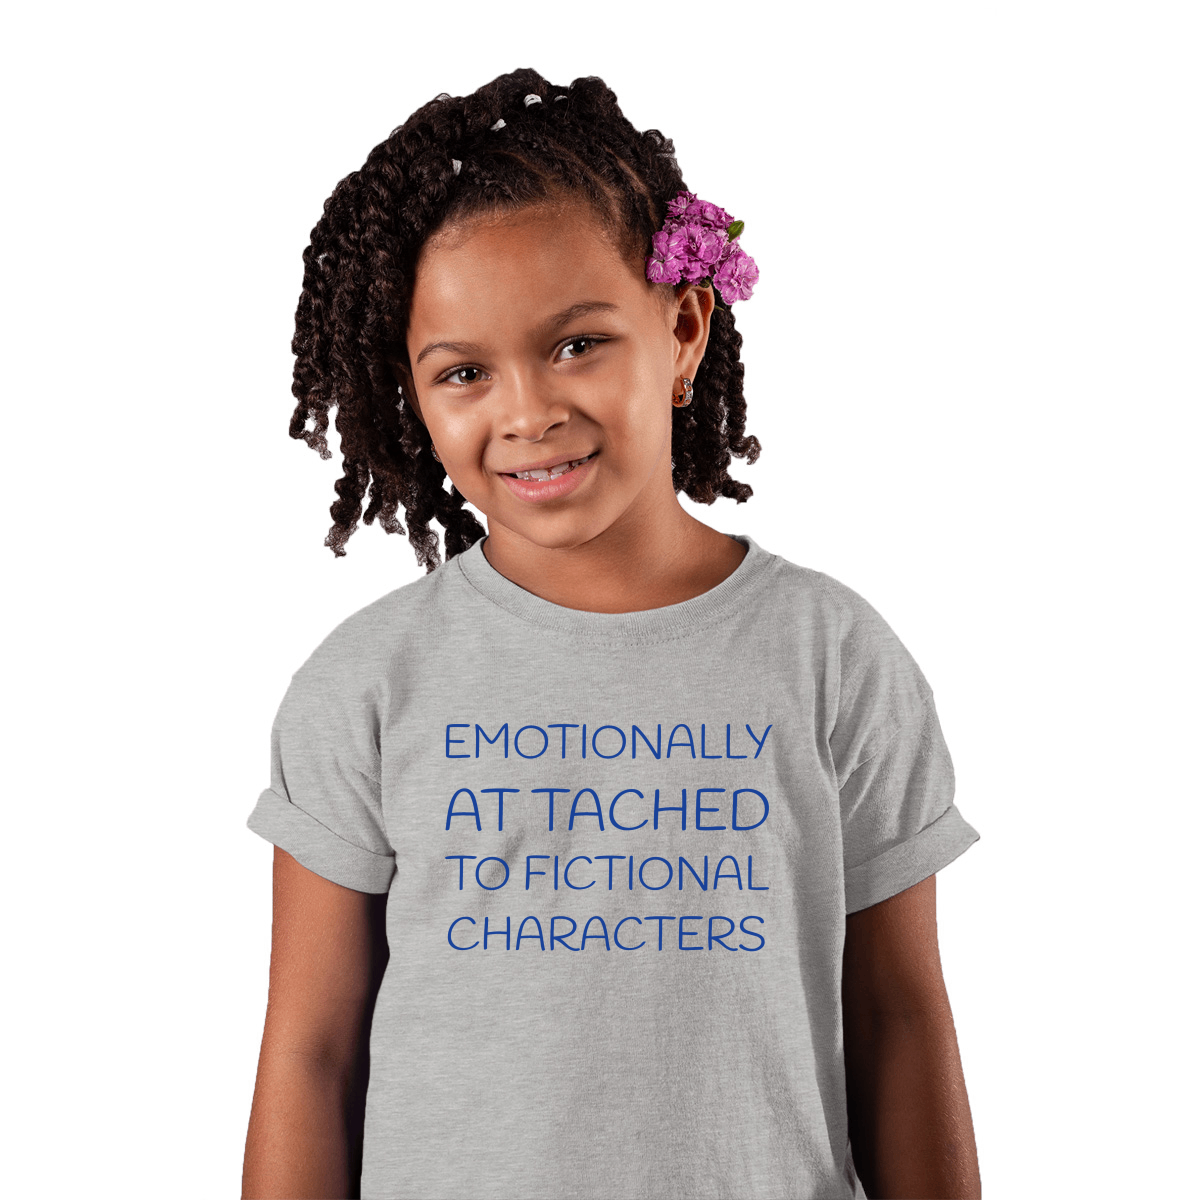 Emotionally Attached to Fictional Characters Kids T-shirt | Gray